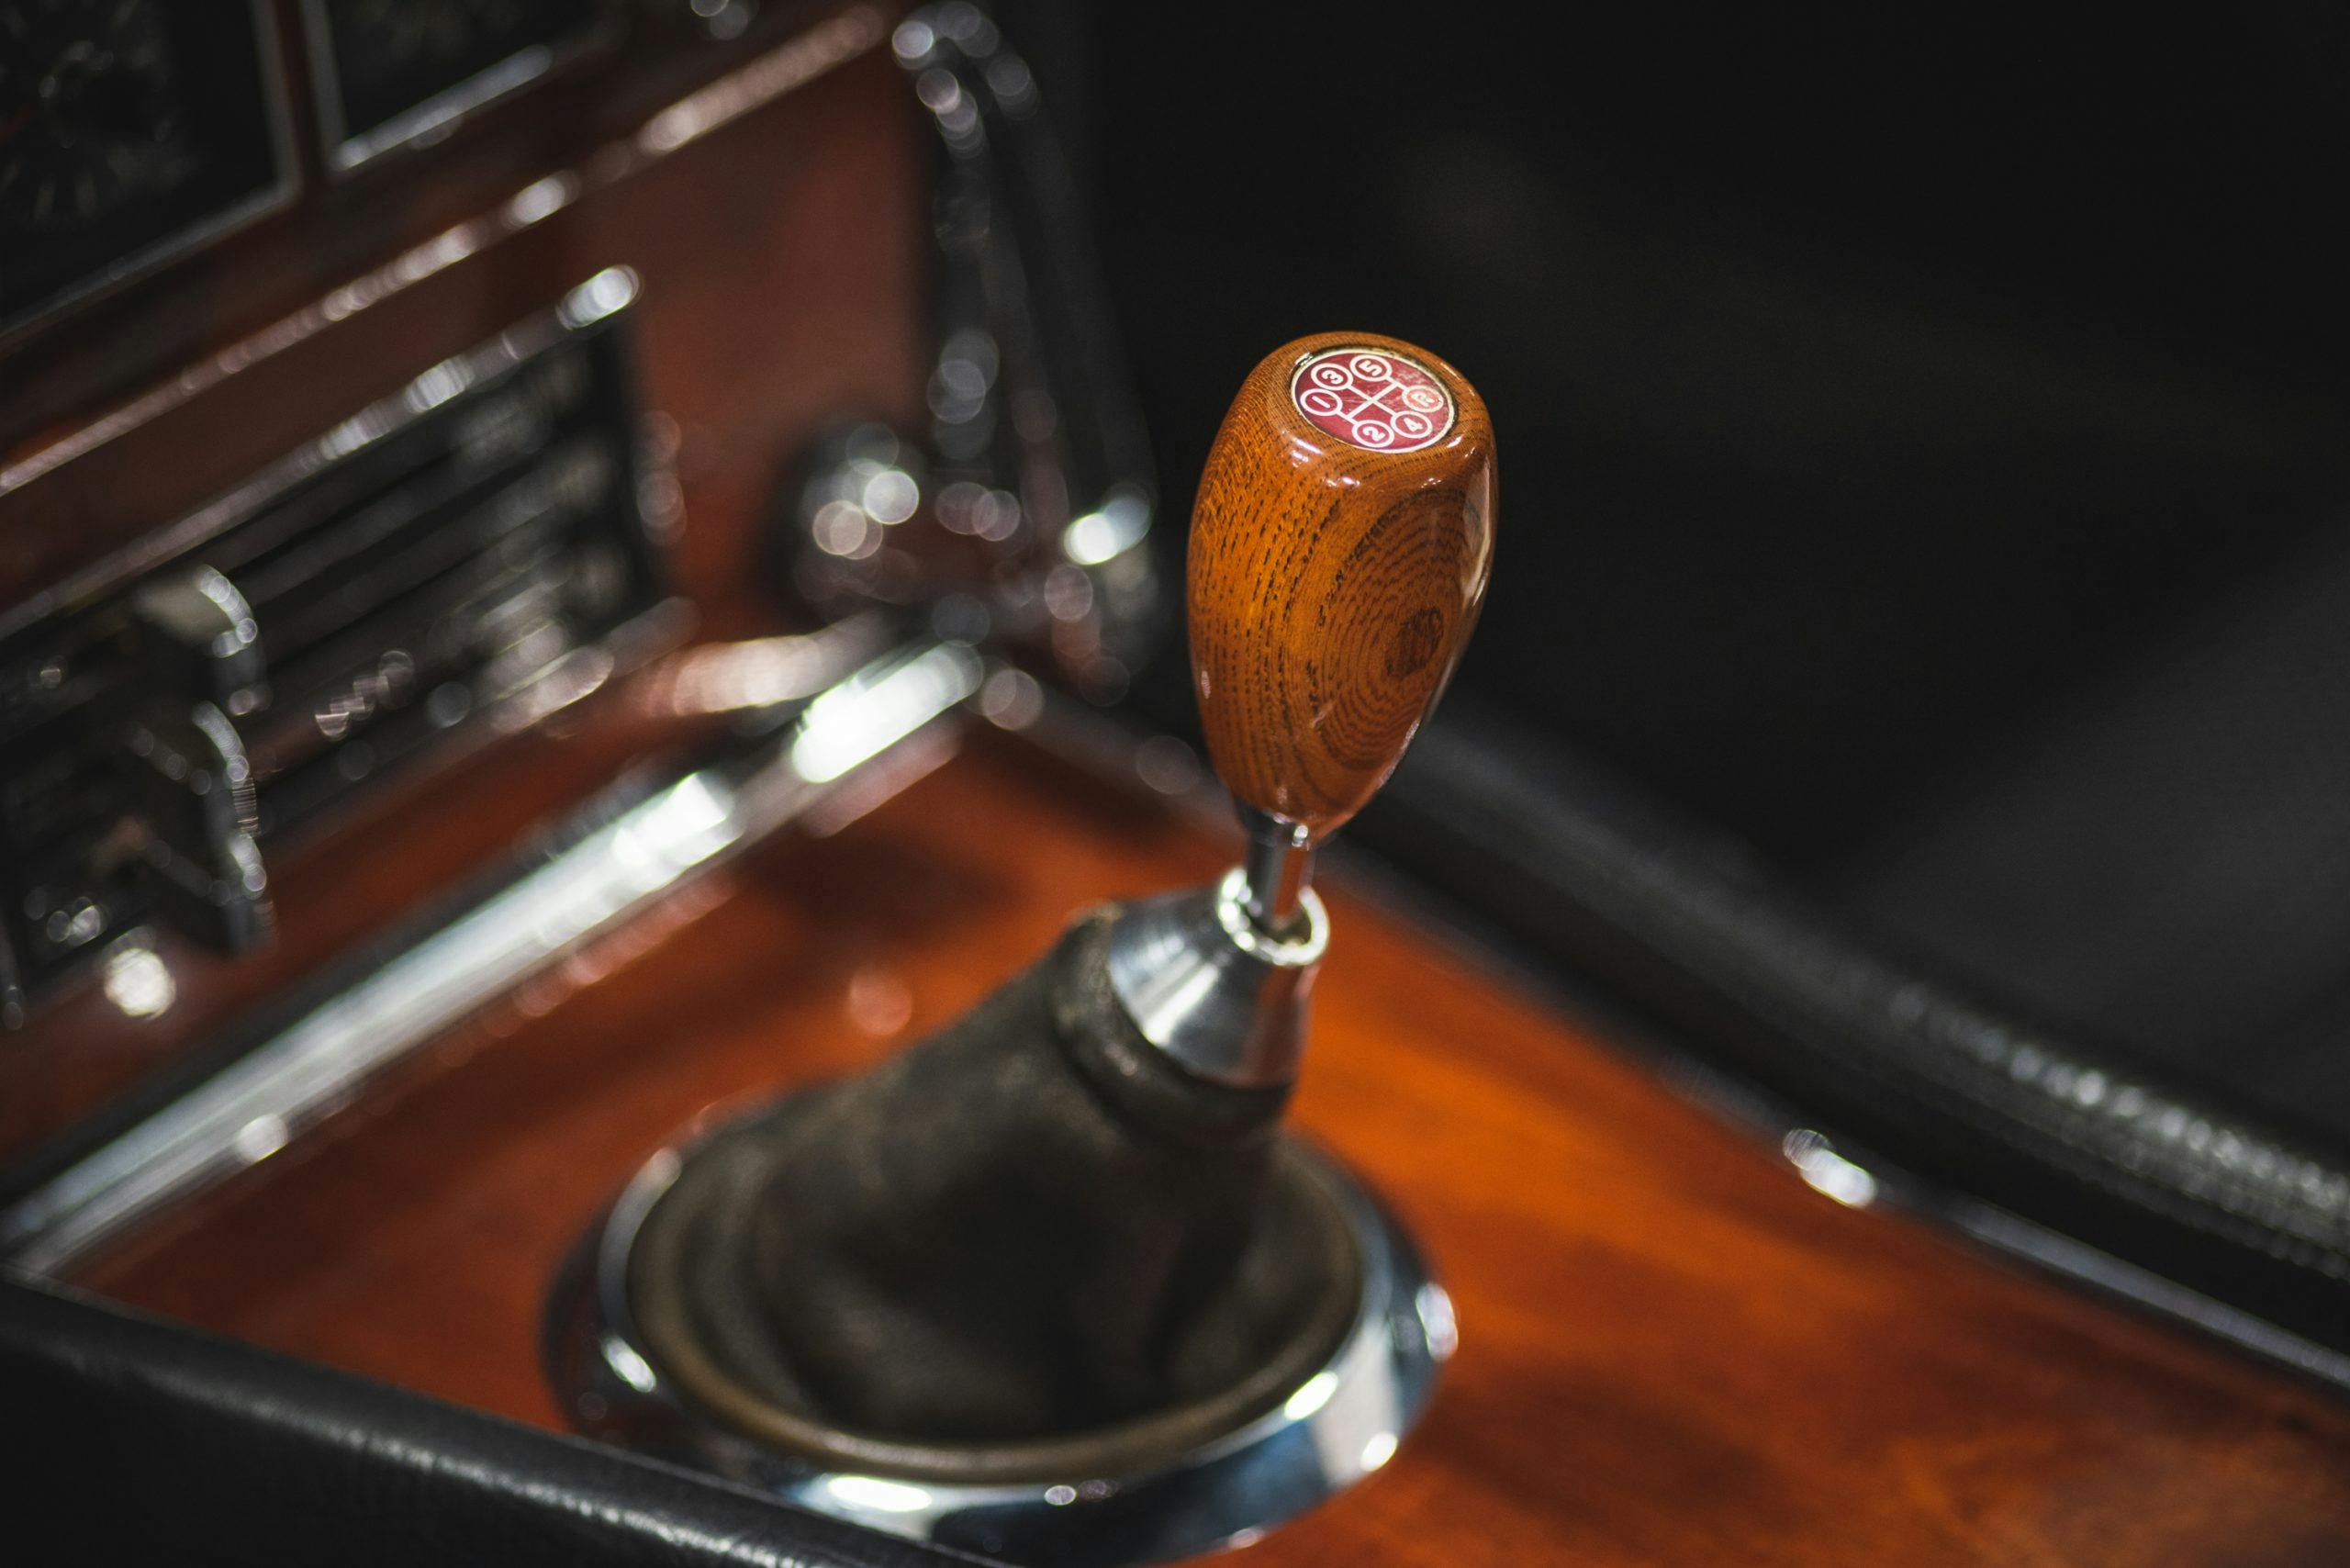 5 speed transmission shifter close up